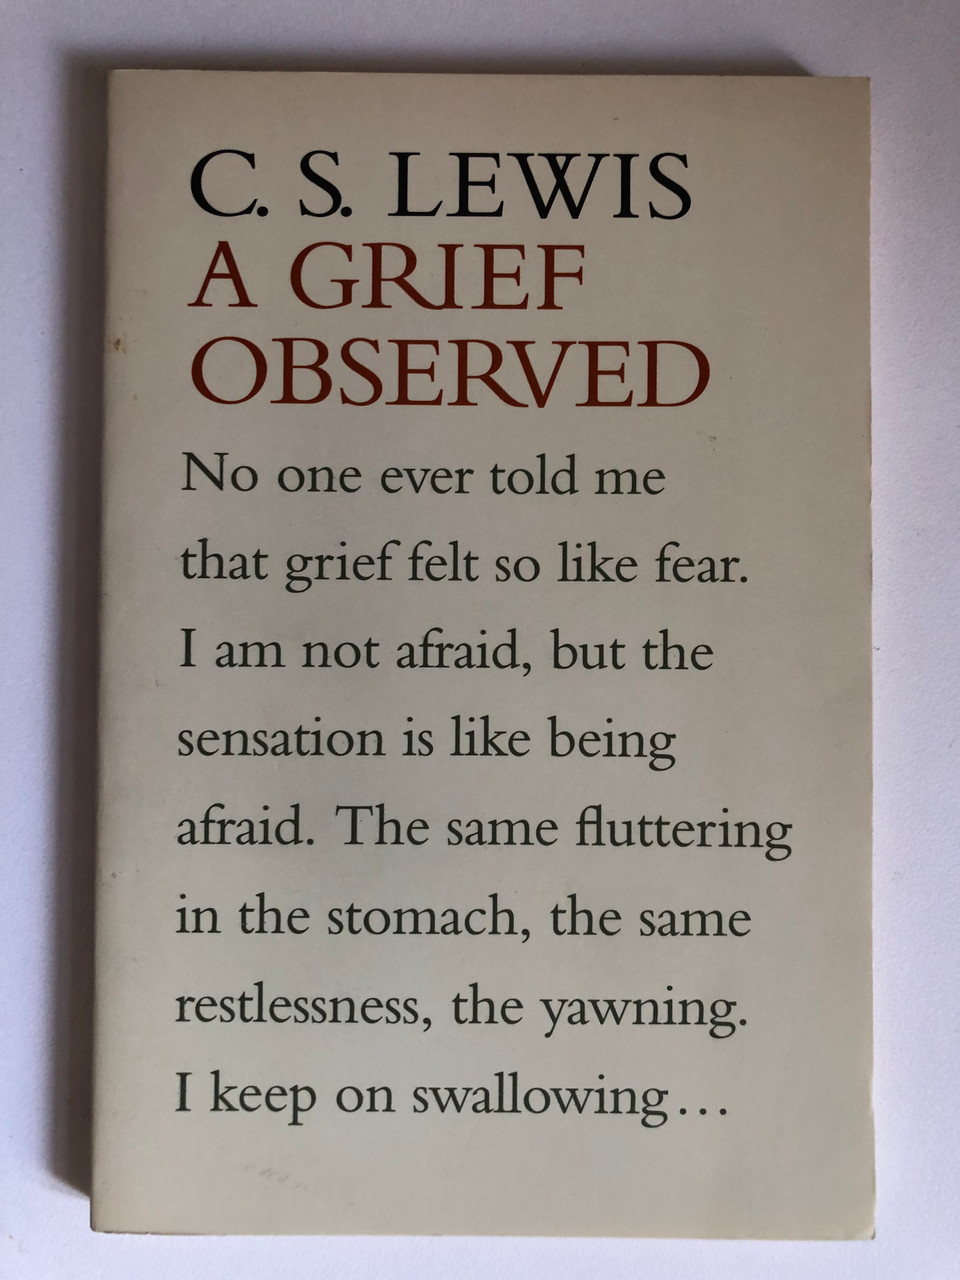 A_Grief_Observed_by_C.S._Lewis_A_TIMELESS_AND_INSPIRING_AFFIRMATION_OF_FAITH_IN_THE_FACE_OF_SENSELESS_LOSS_Publisher_Harper_Collins_Publisher_2__78901.1691242842.1280.1280.JPG (960×1280)